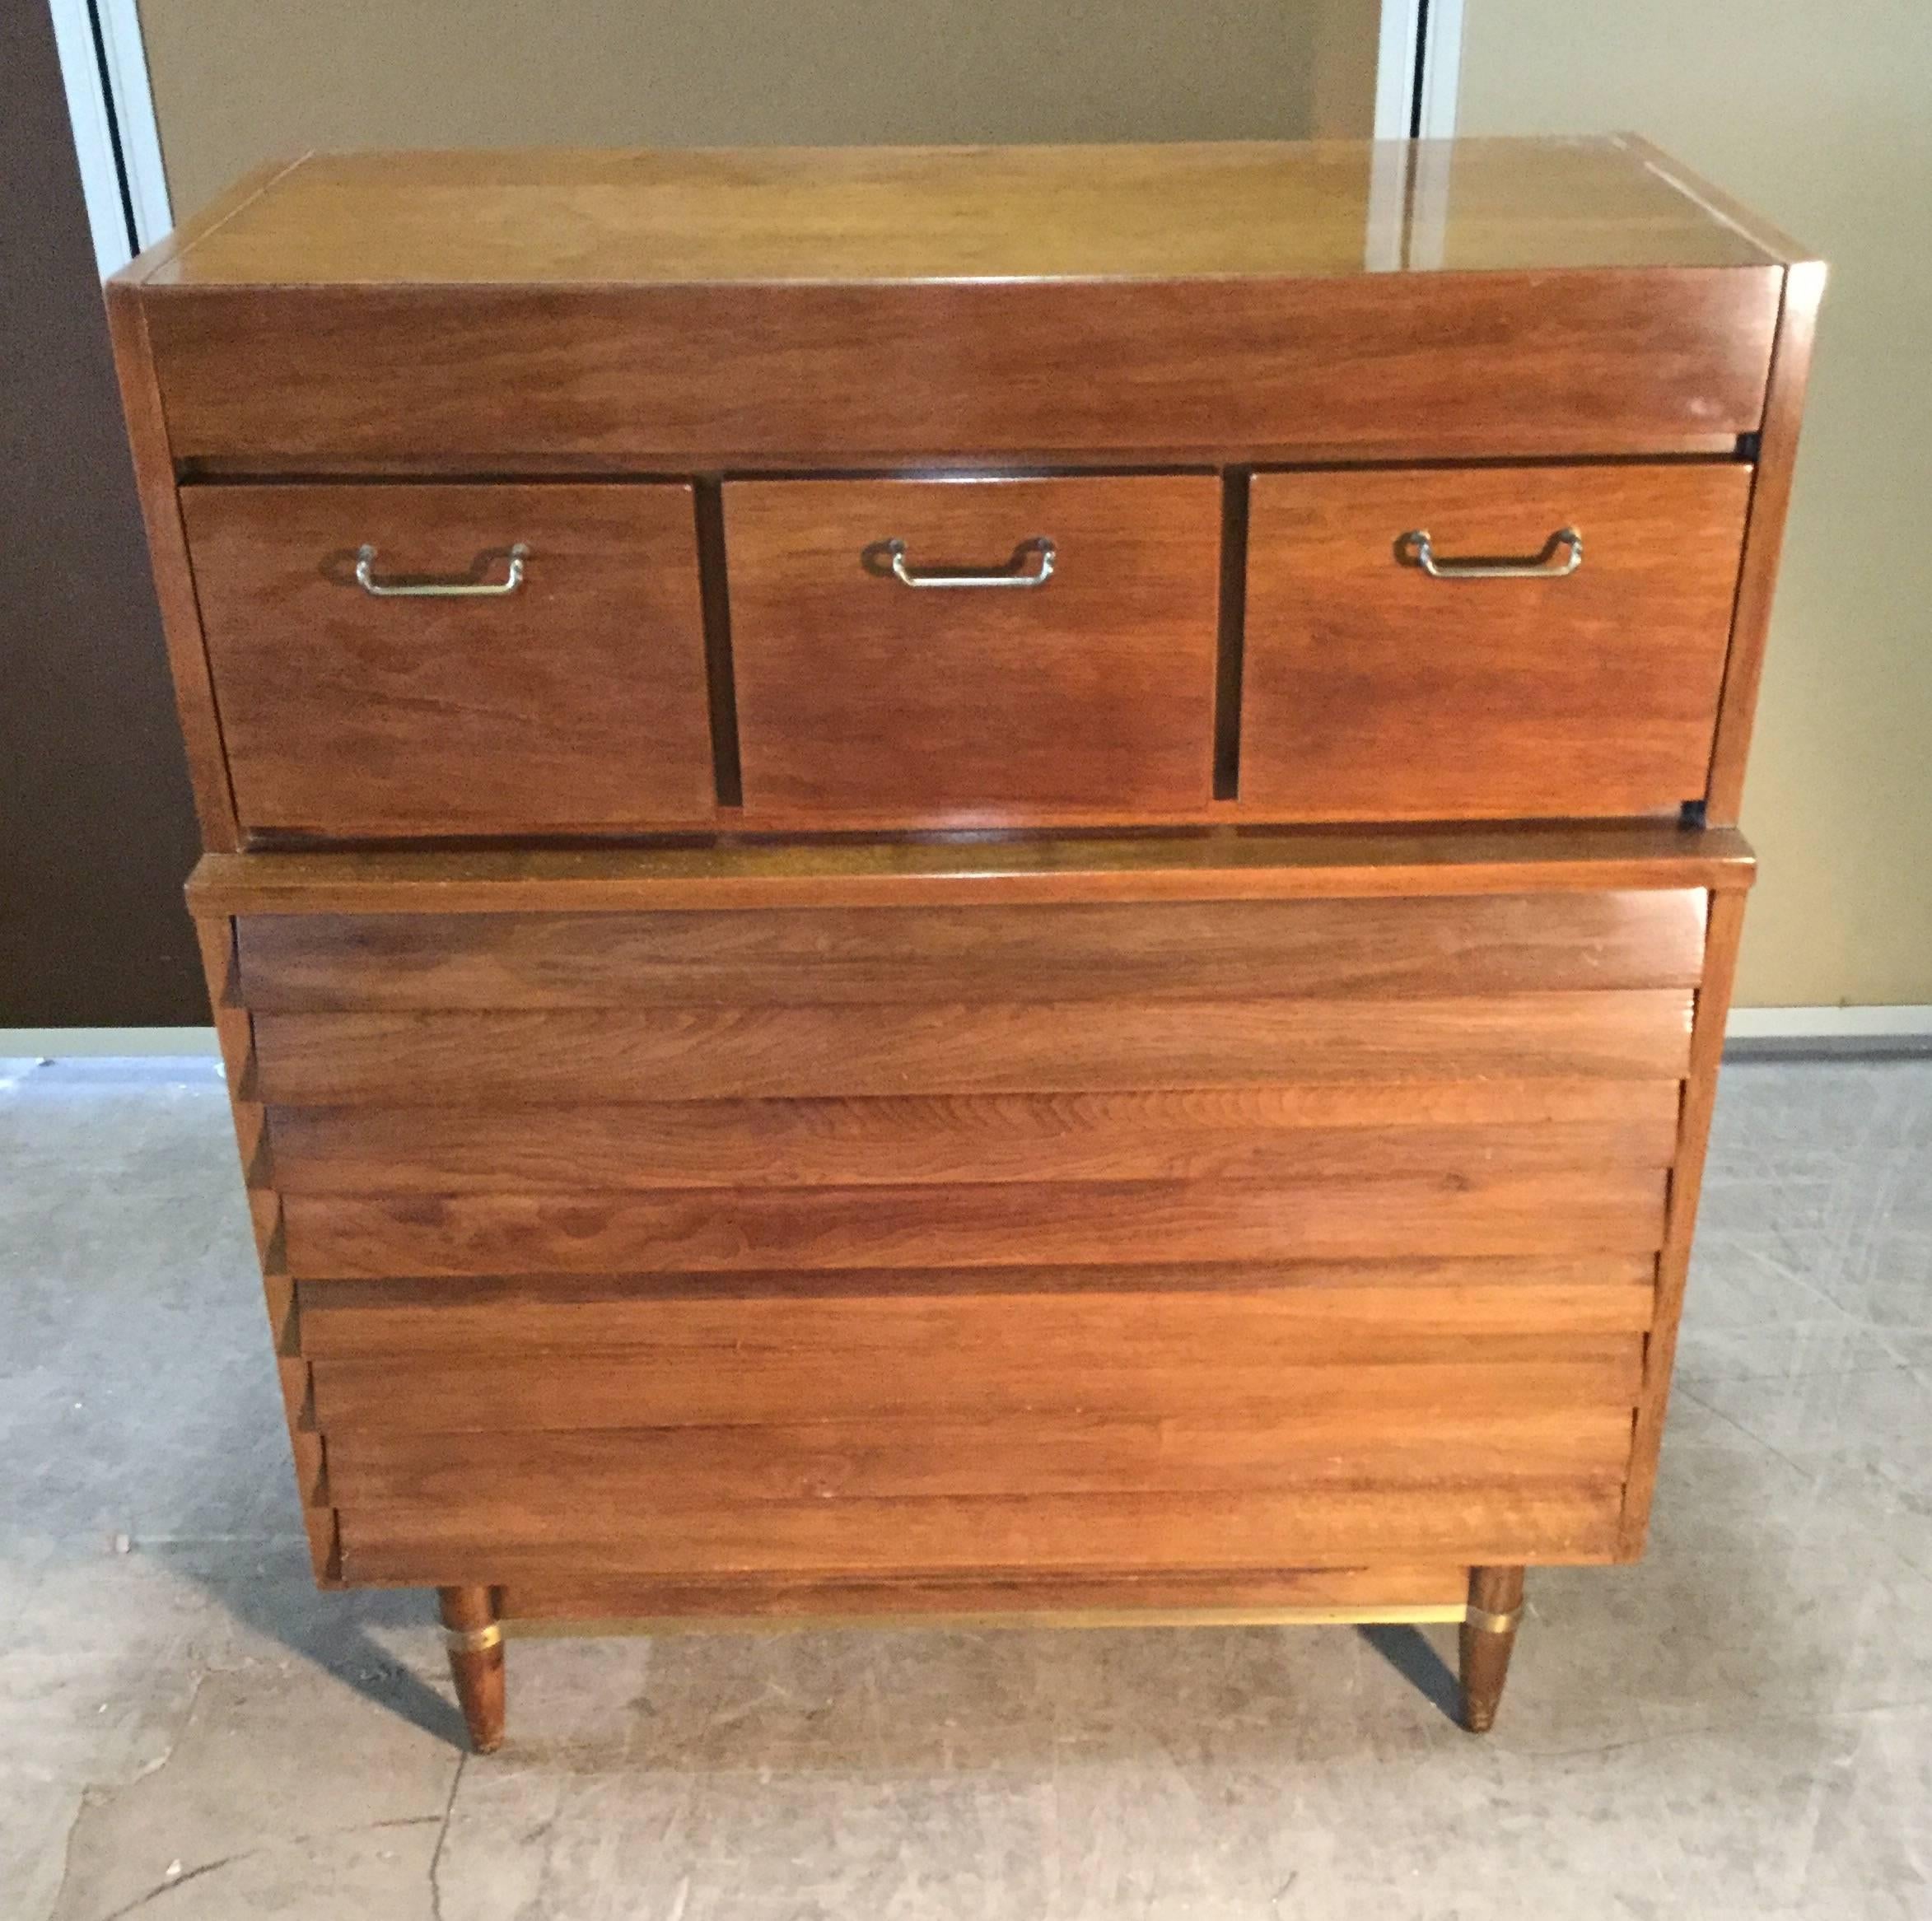 A Classic tall chest by Merton Gershun for his Dania collection manufactured by American of Martinsville. Features three drawers over three generous drawers with louver fronts. Brass detail.